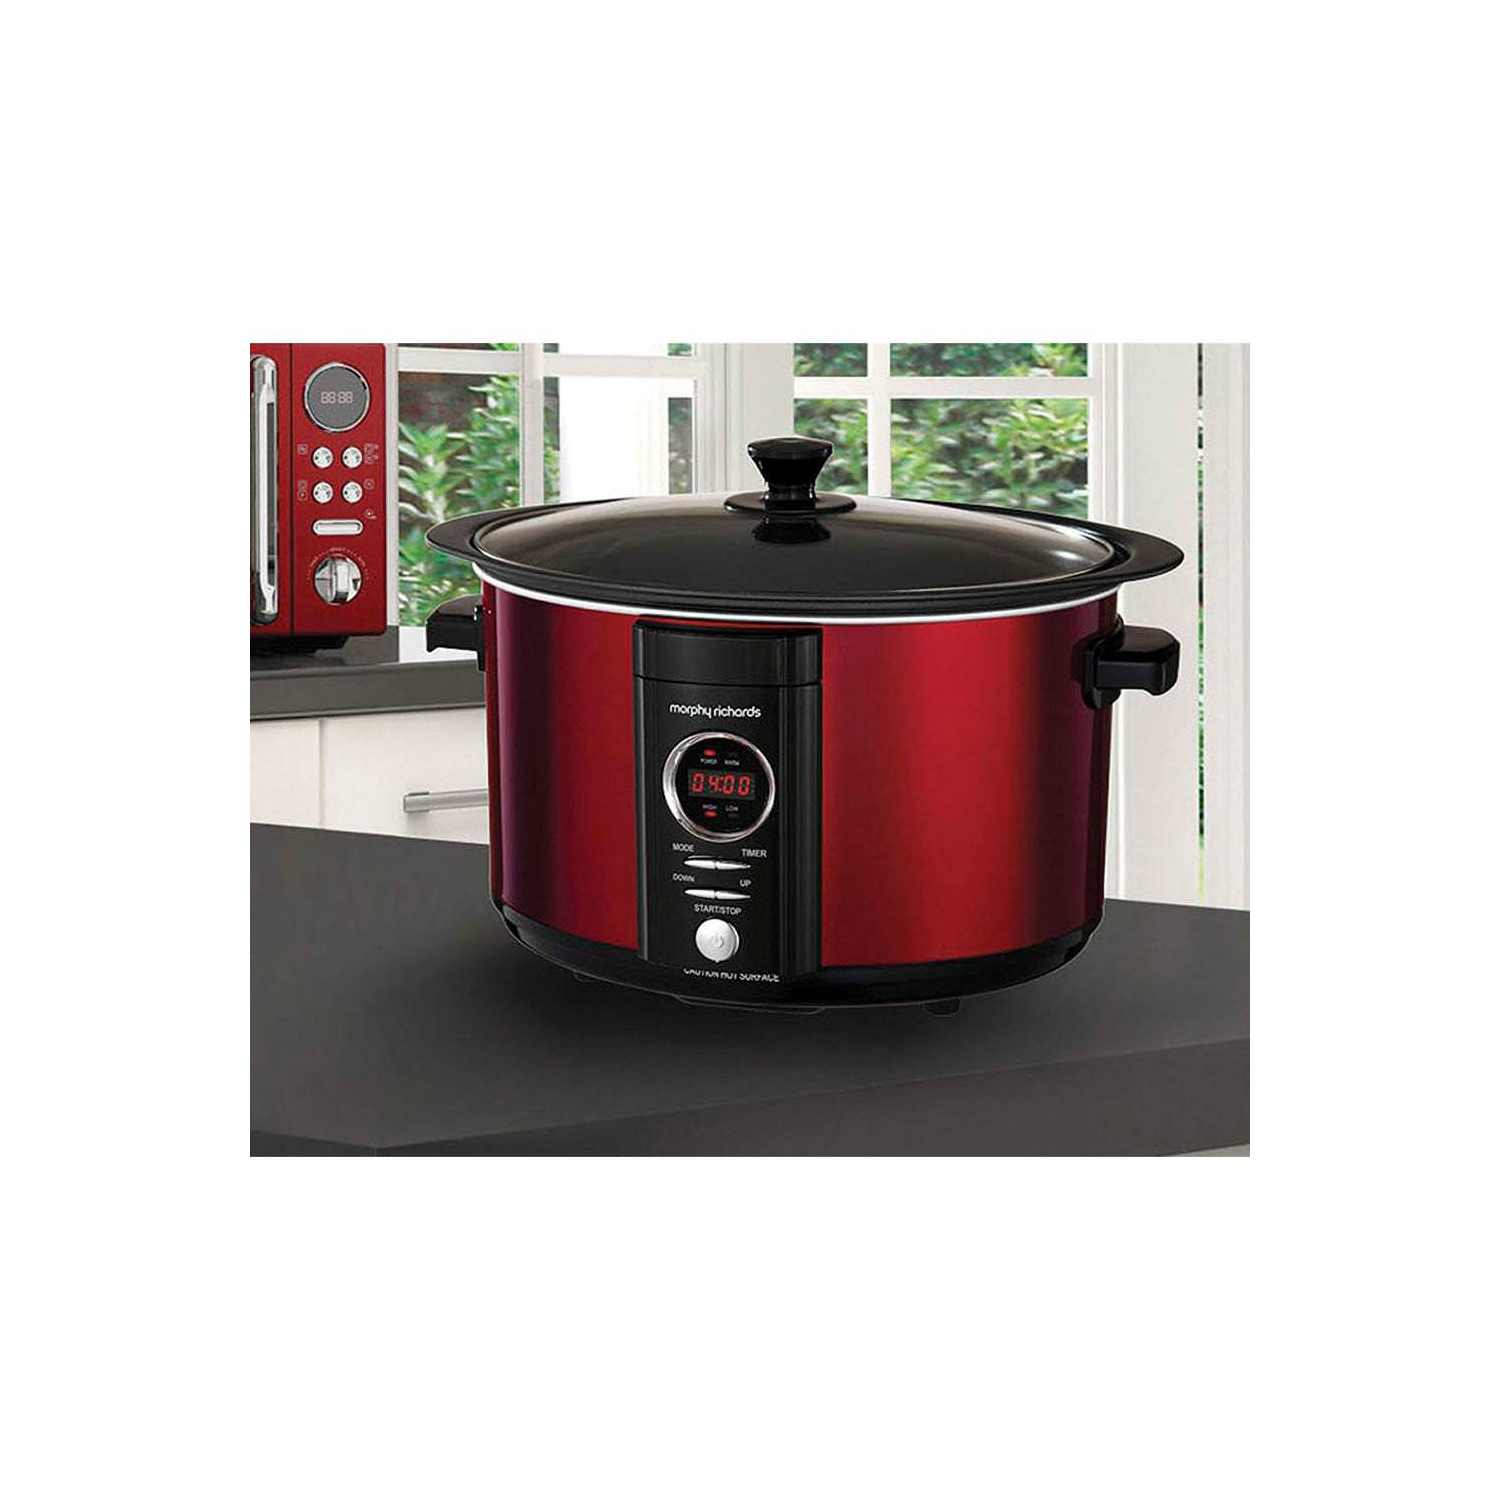 Sear and Stew Digital Slow Cooker 6.5L